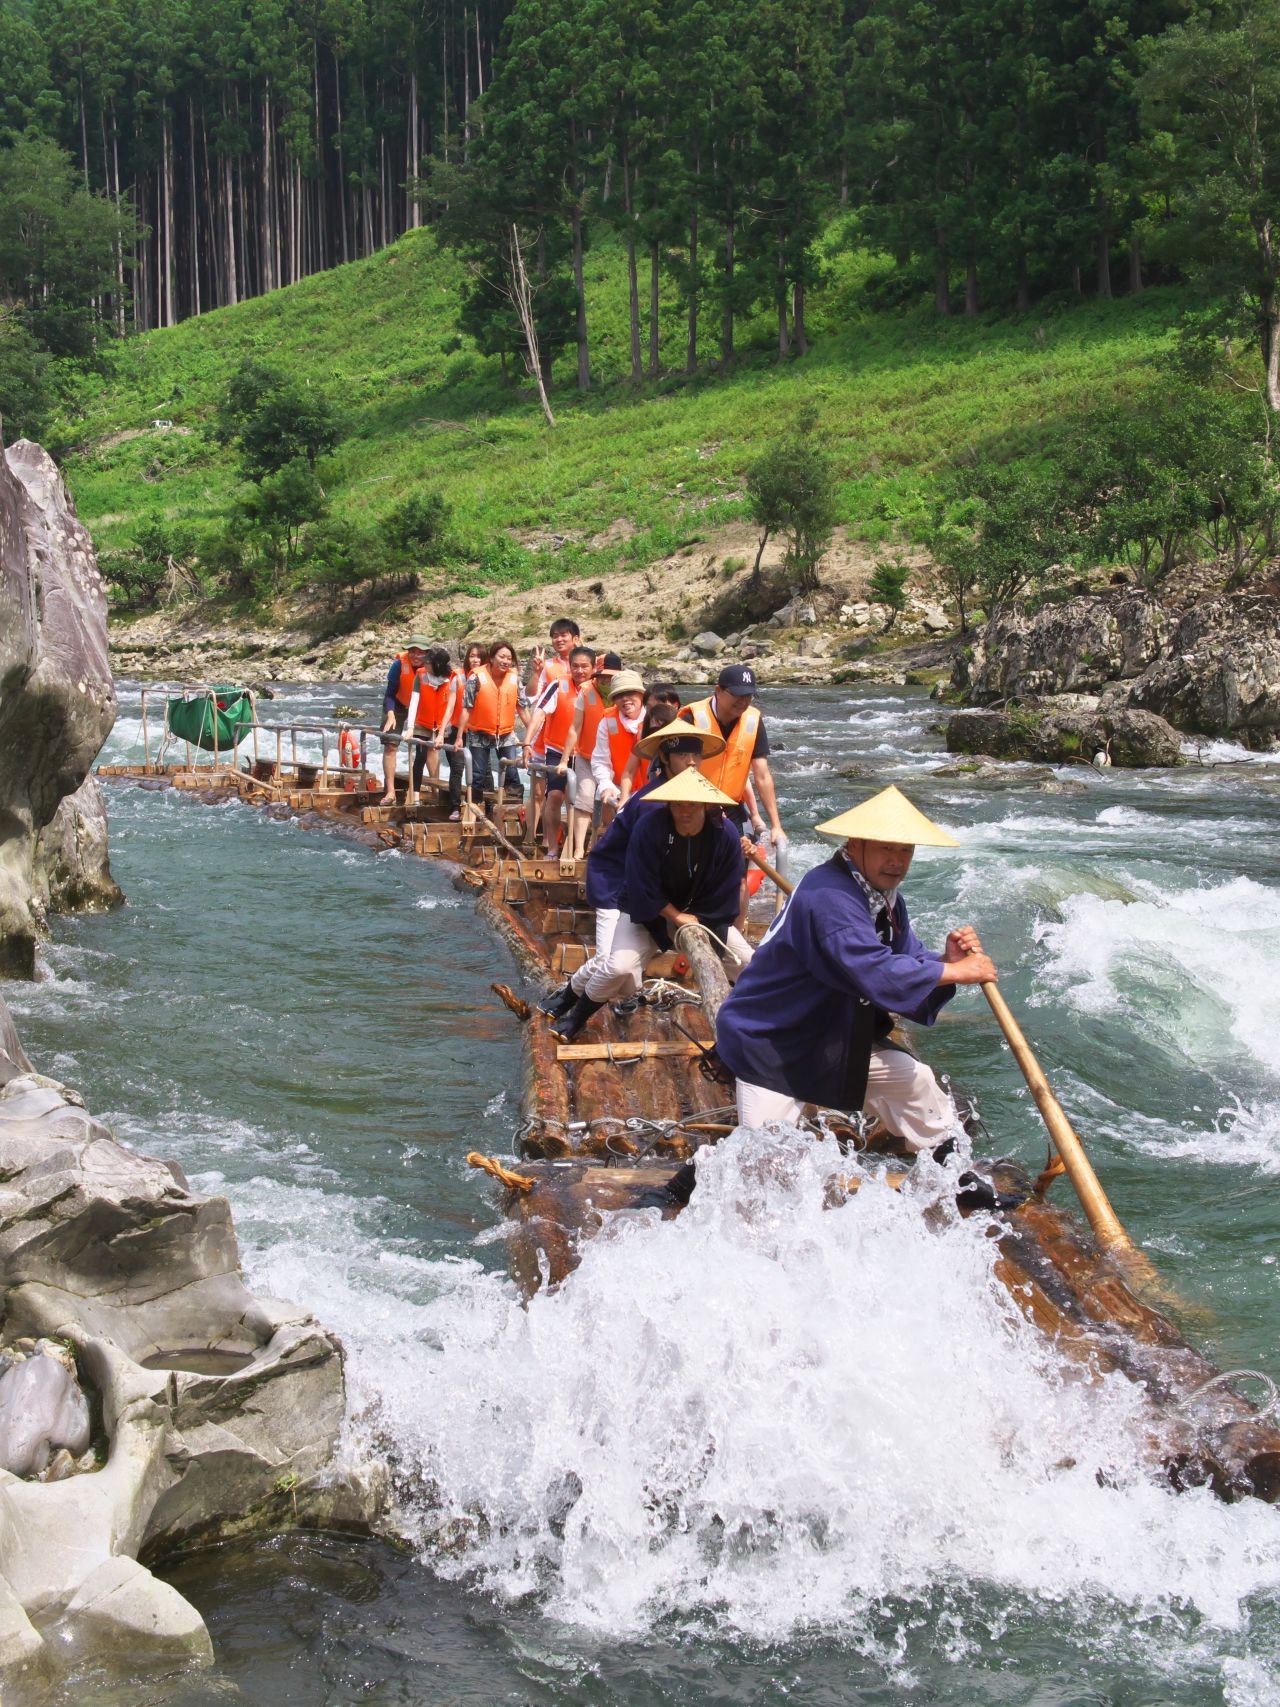 The wildest way to experience the serene natural beauty of Japan's Kitayama River? Rush down its thrilling currents while standing up on a narrow wooden raft.